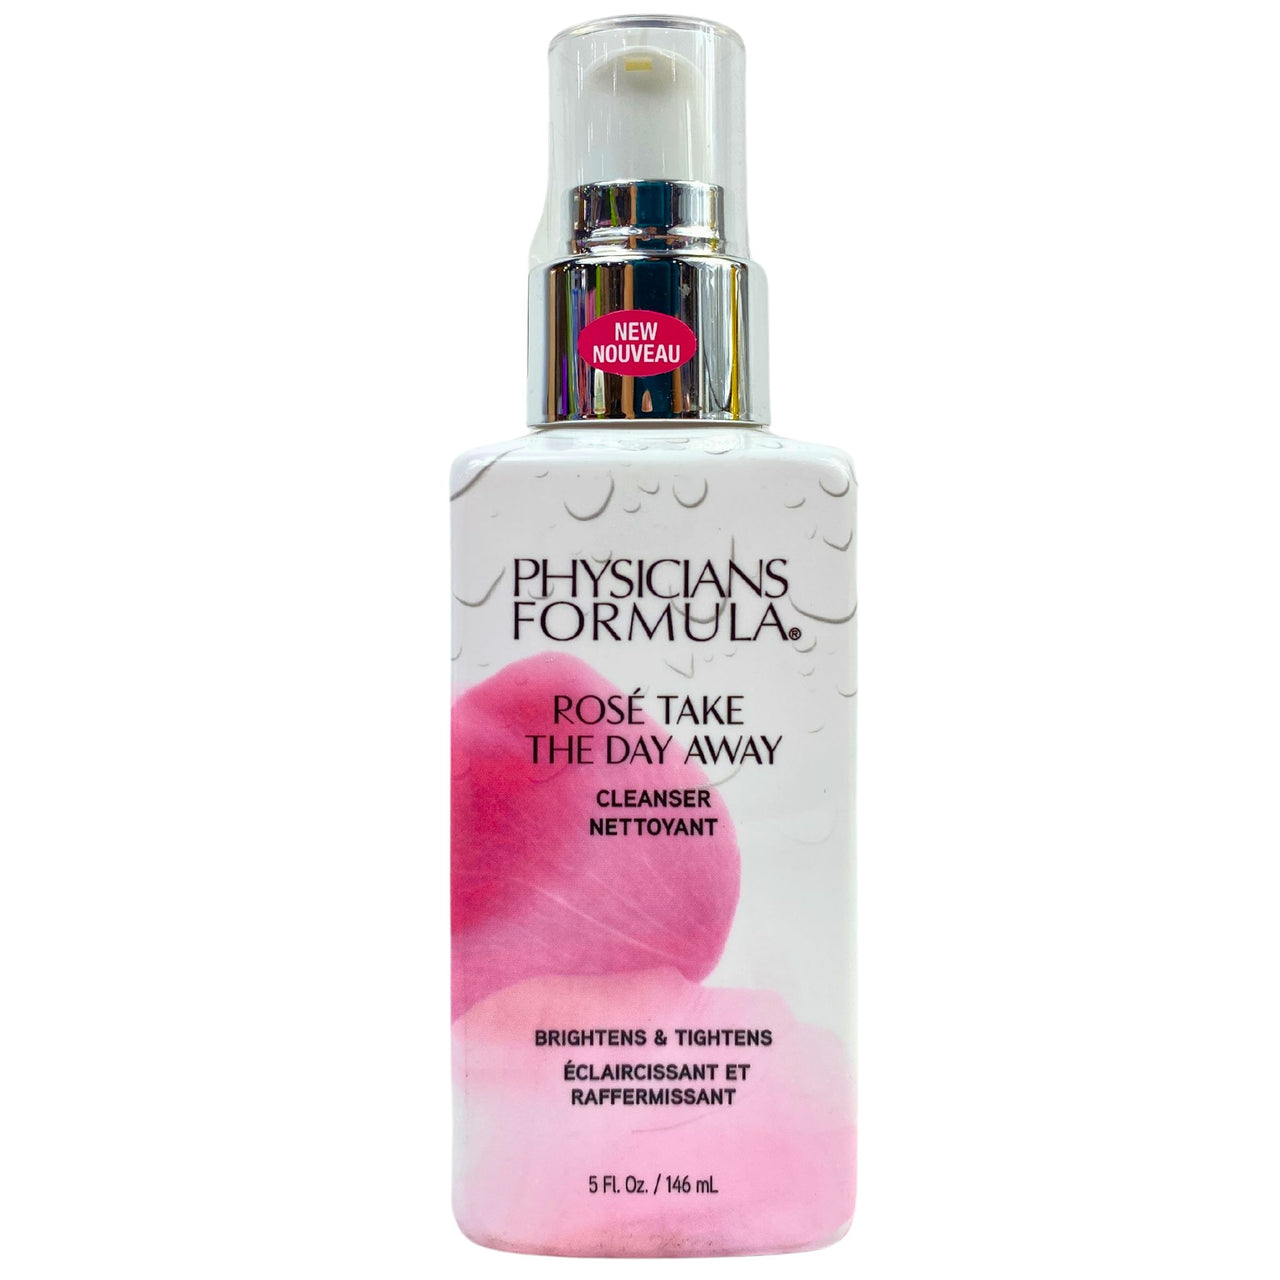 Physicians Formula Rose Take The Day Away Cleanser Brightens & Tightens